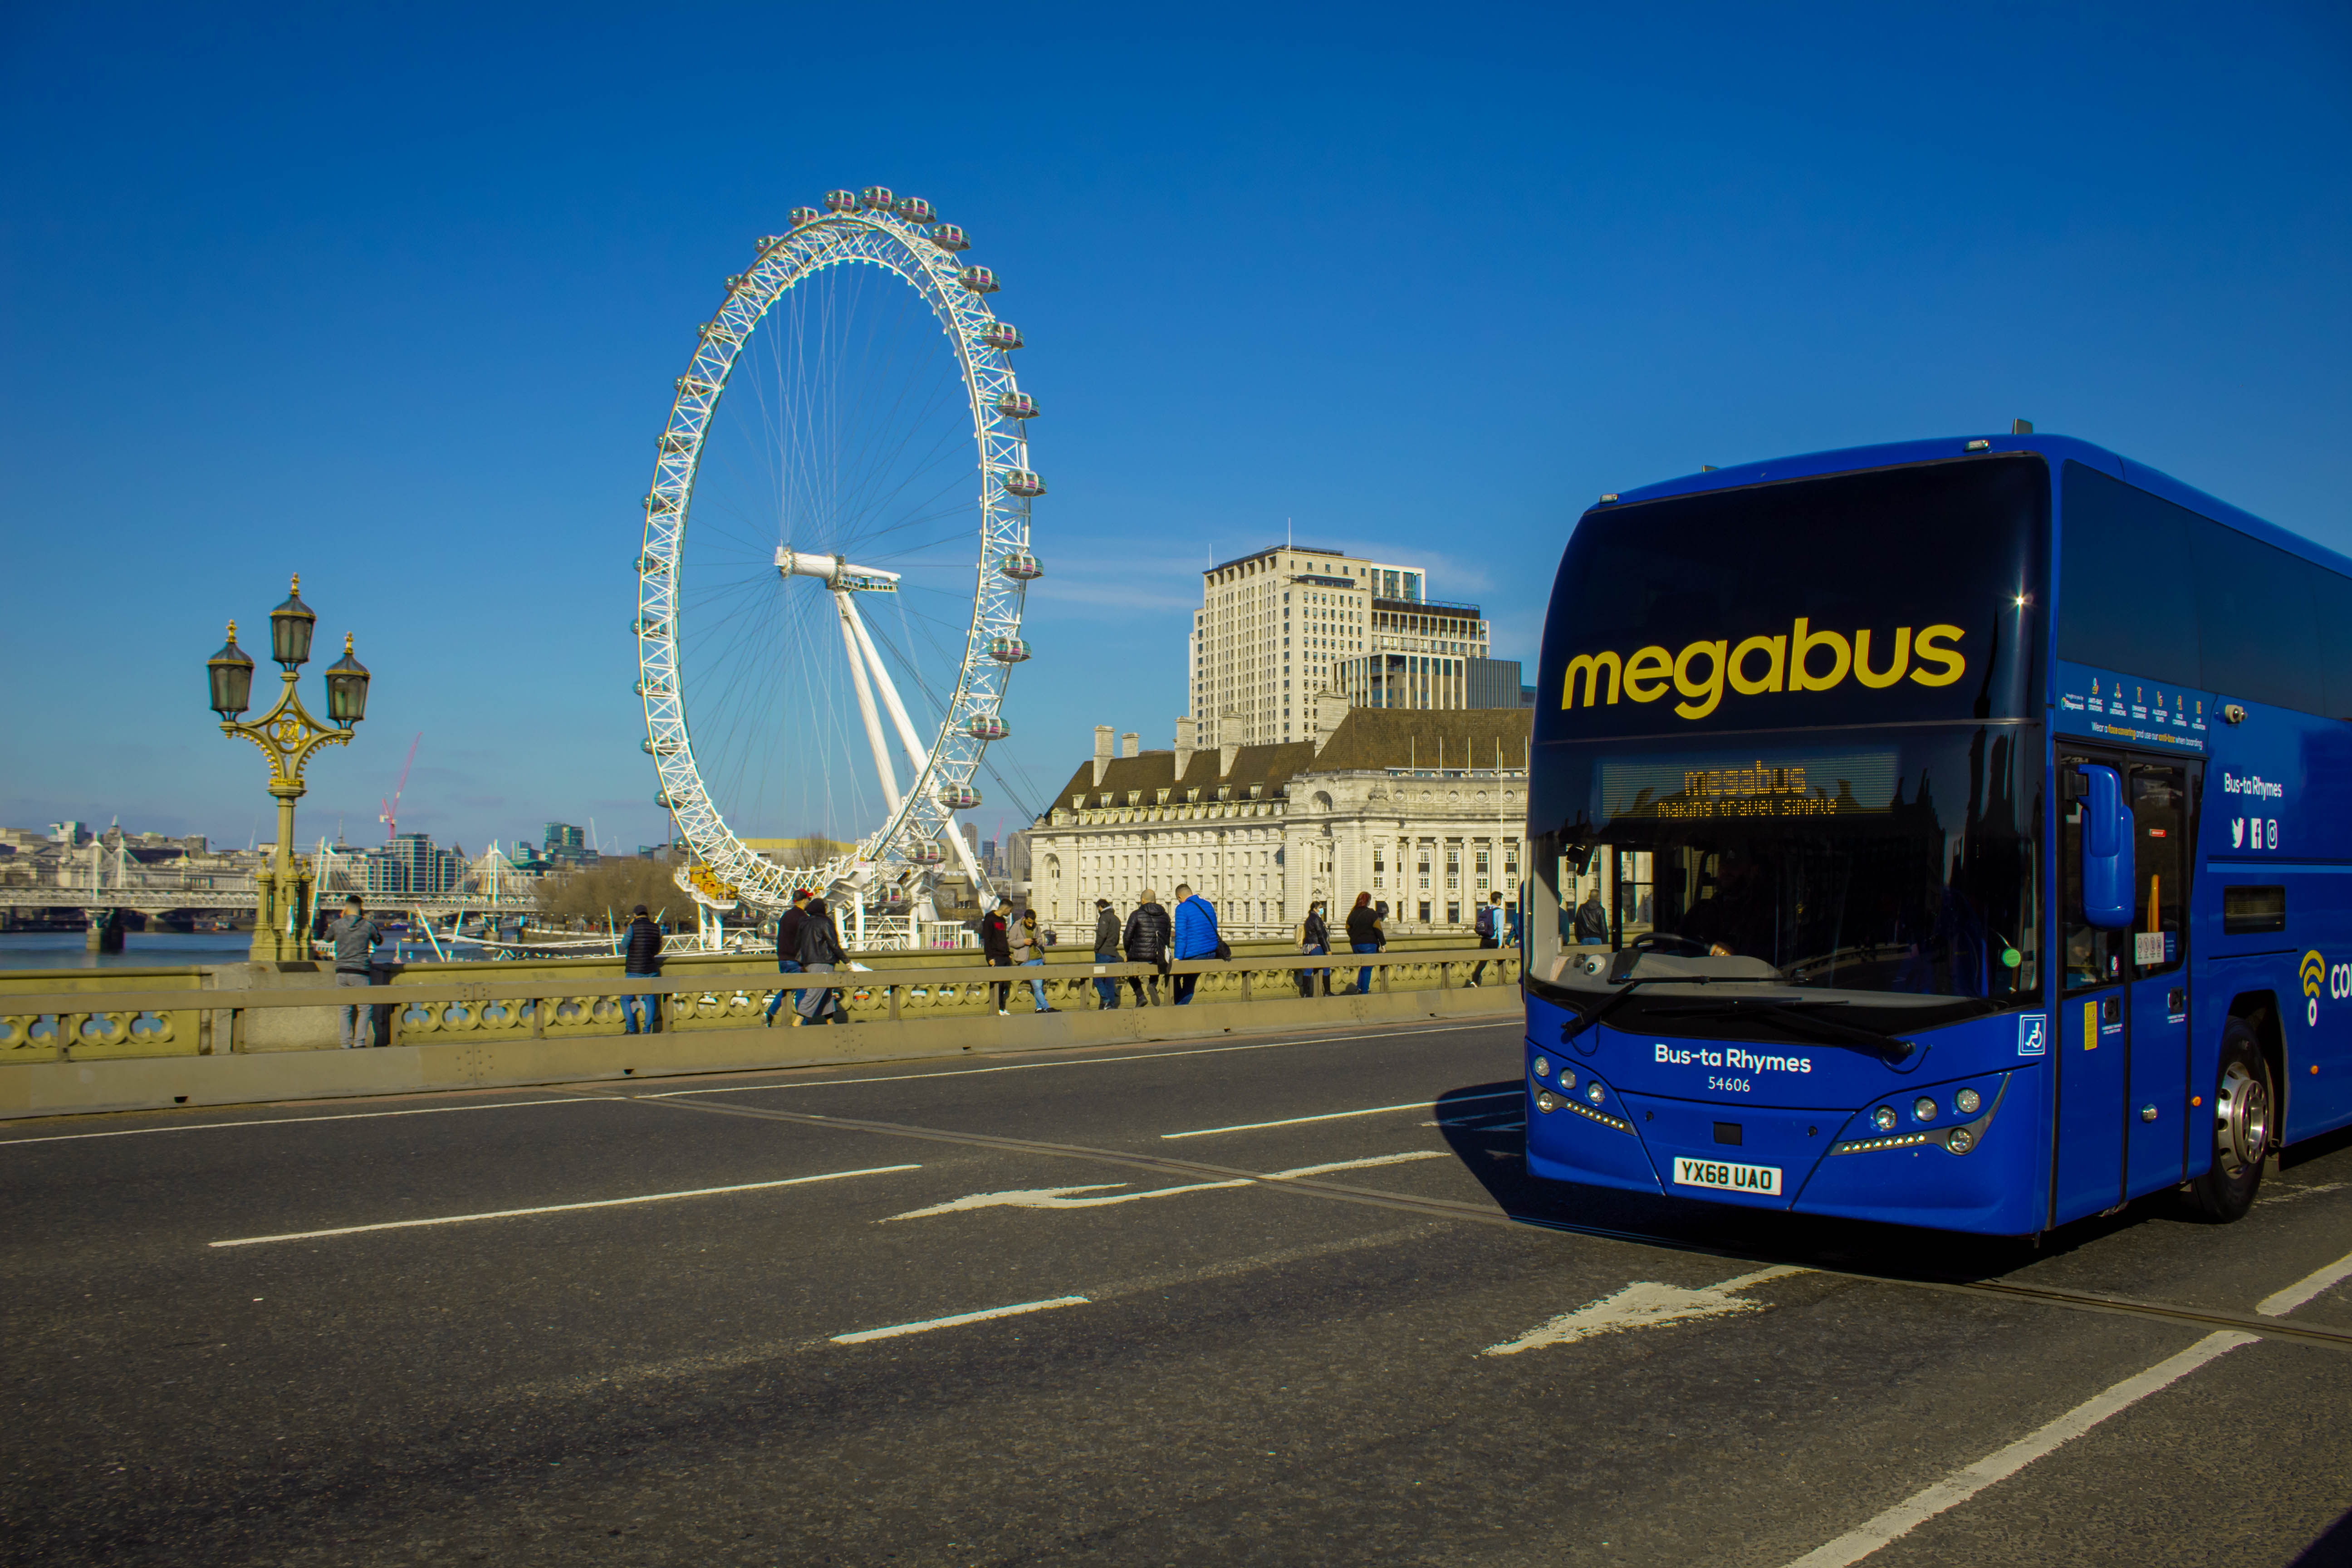 megabus partners with ABE for Stansted service